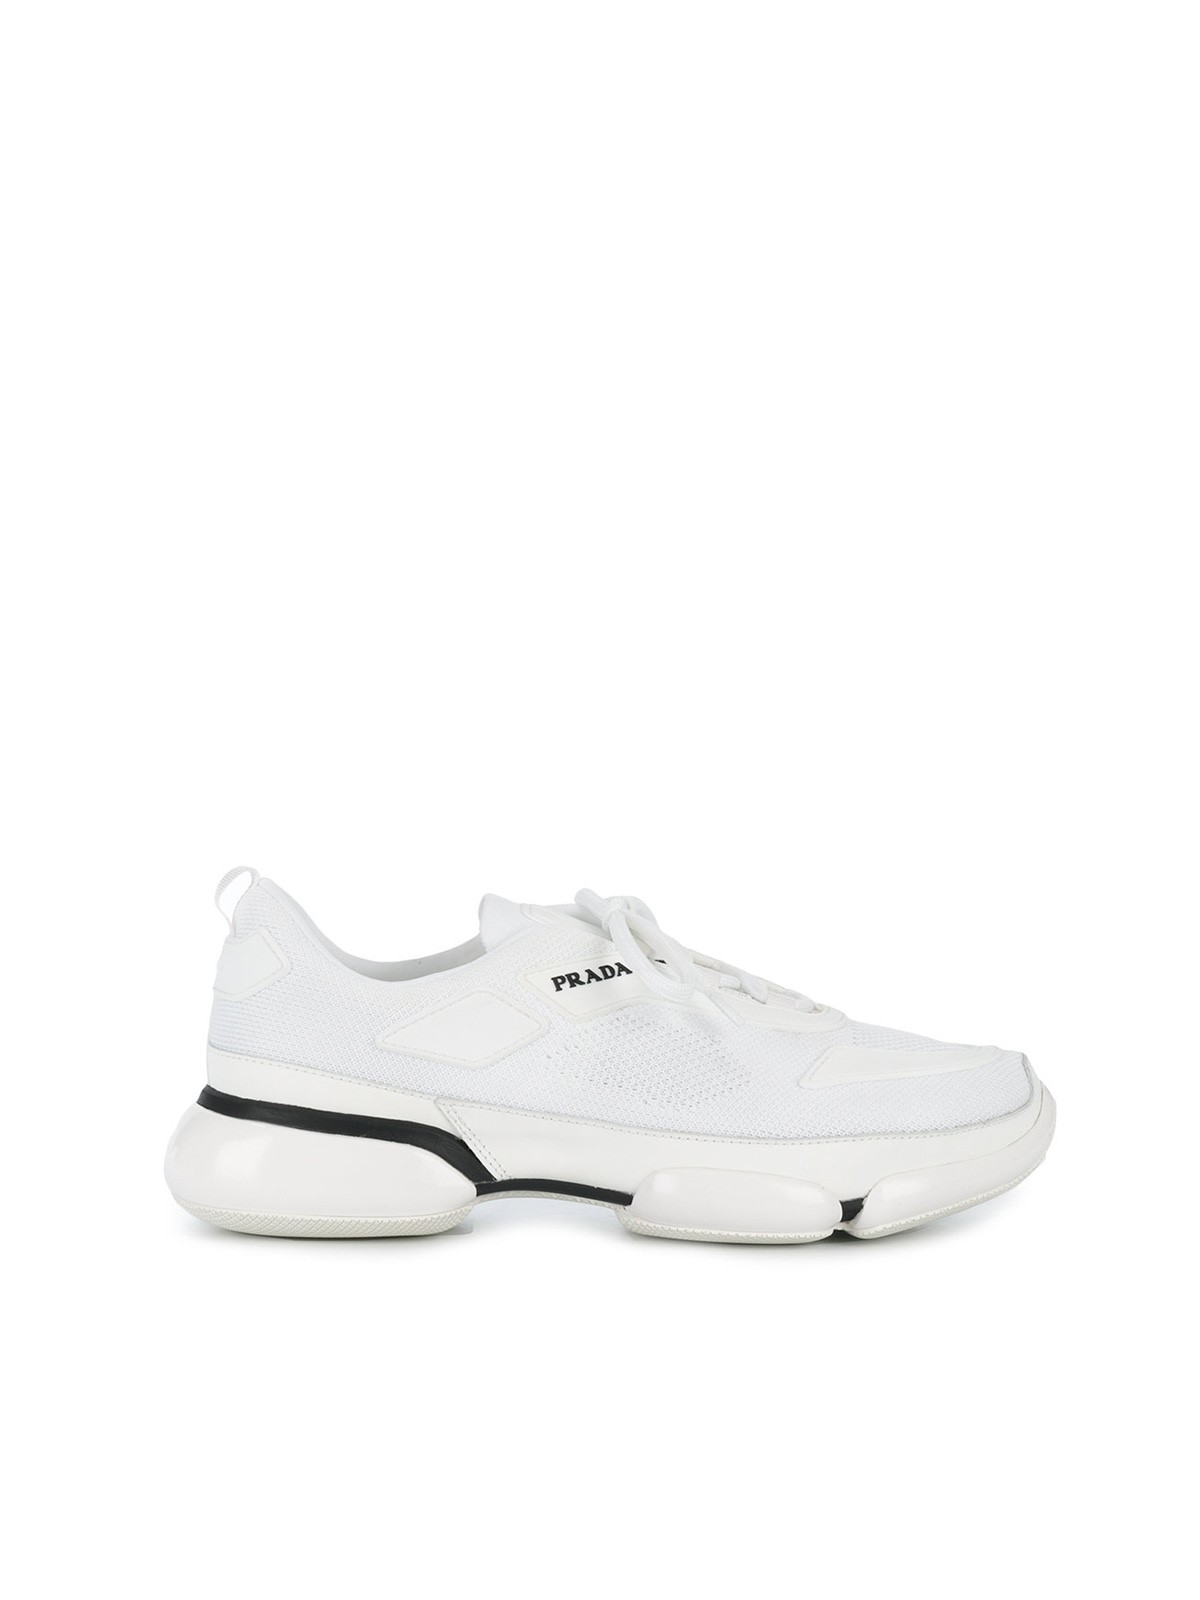 prada RUNNER SNEAKERS available on montiboutique.com - 23096